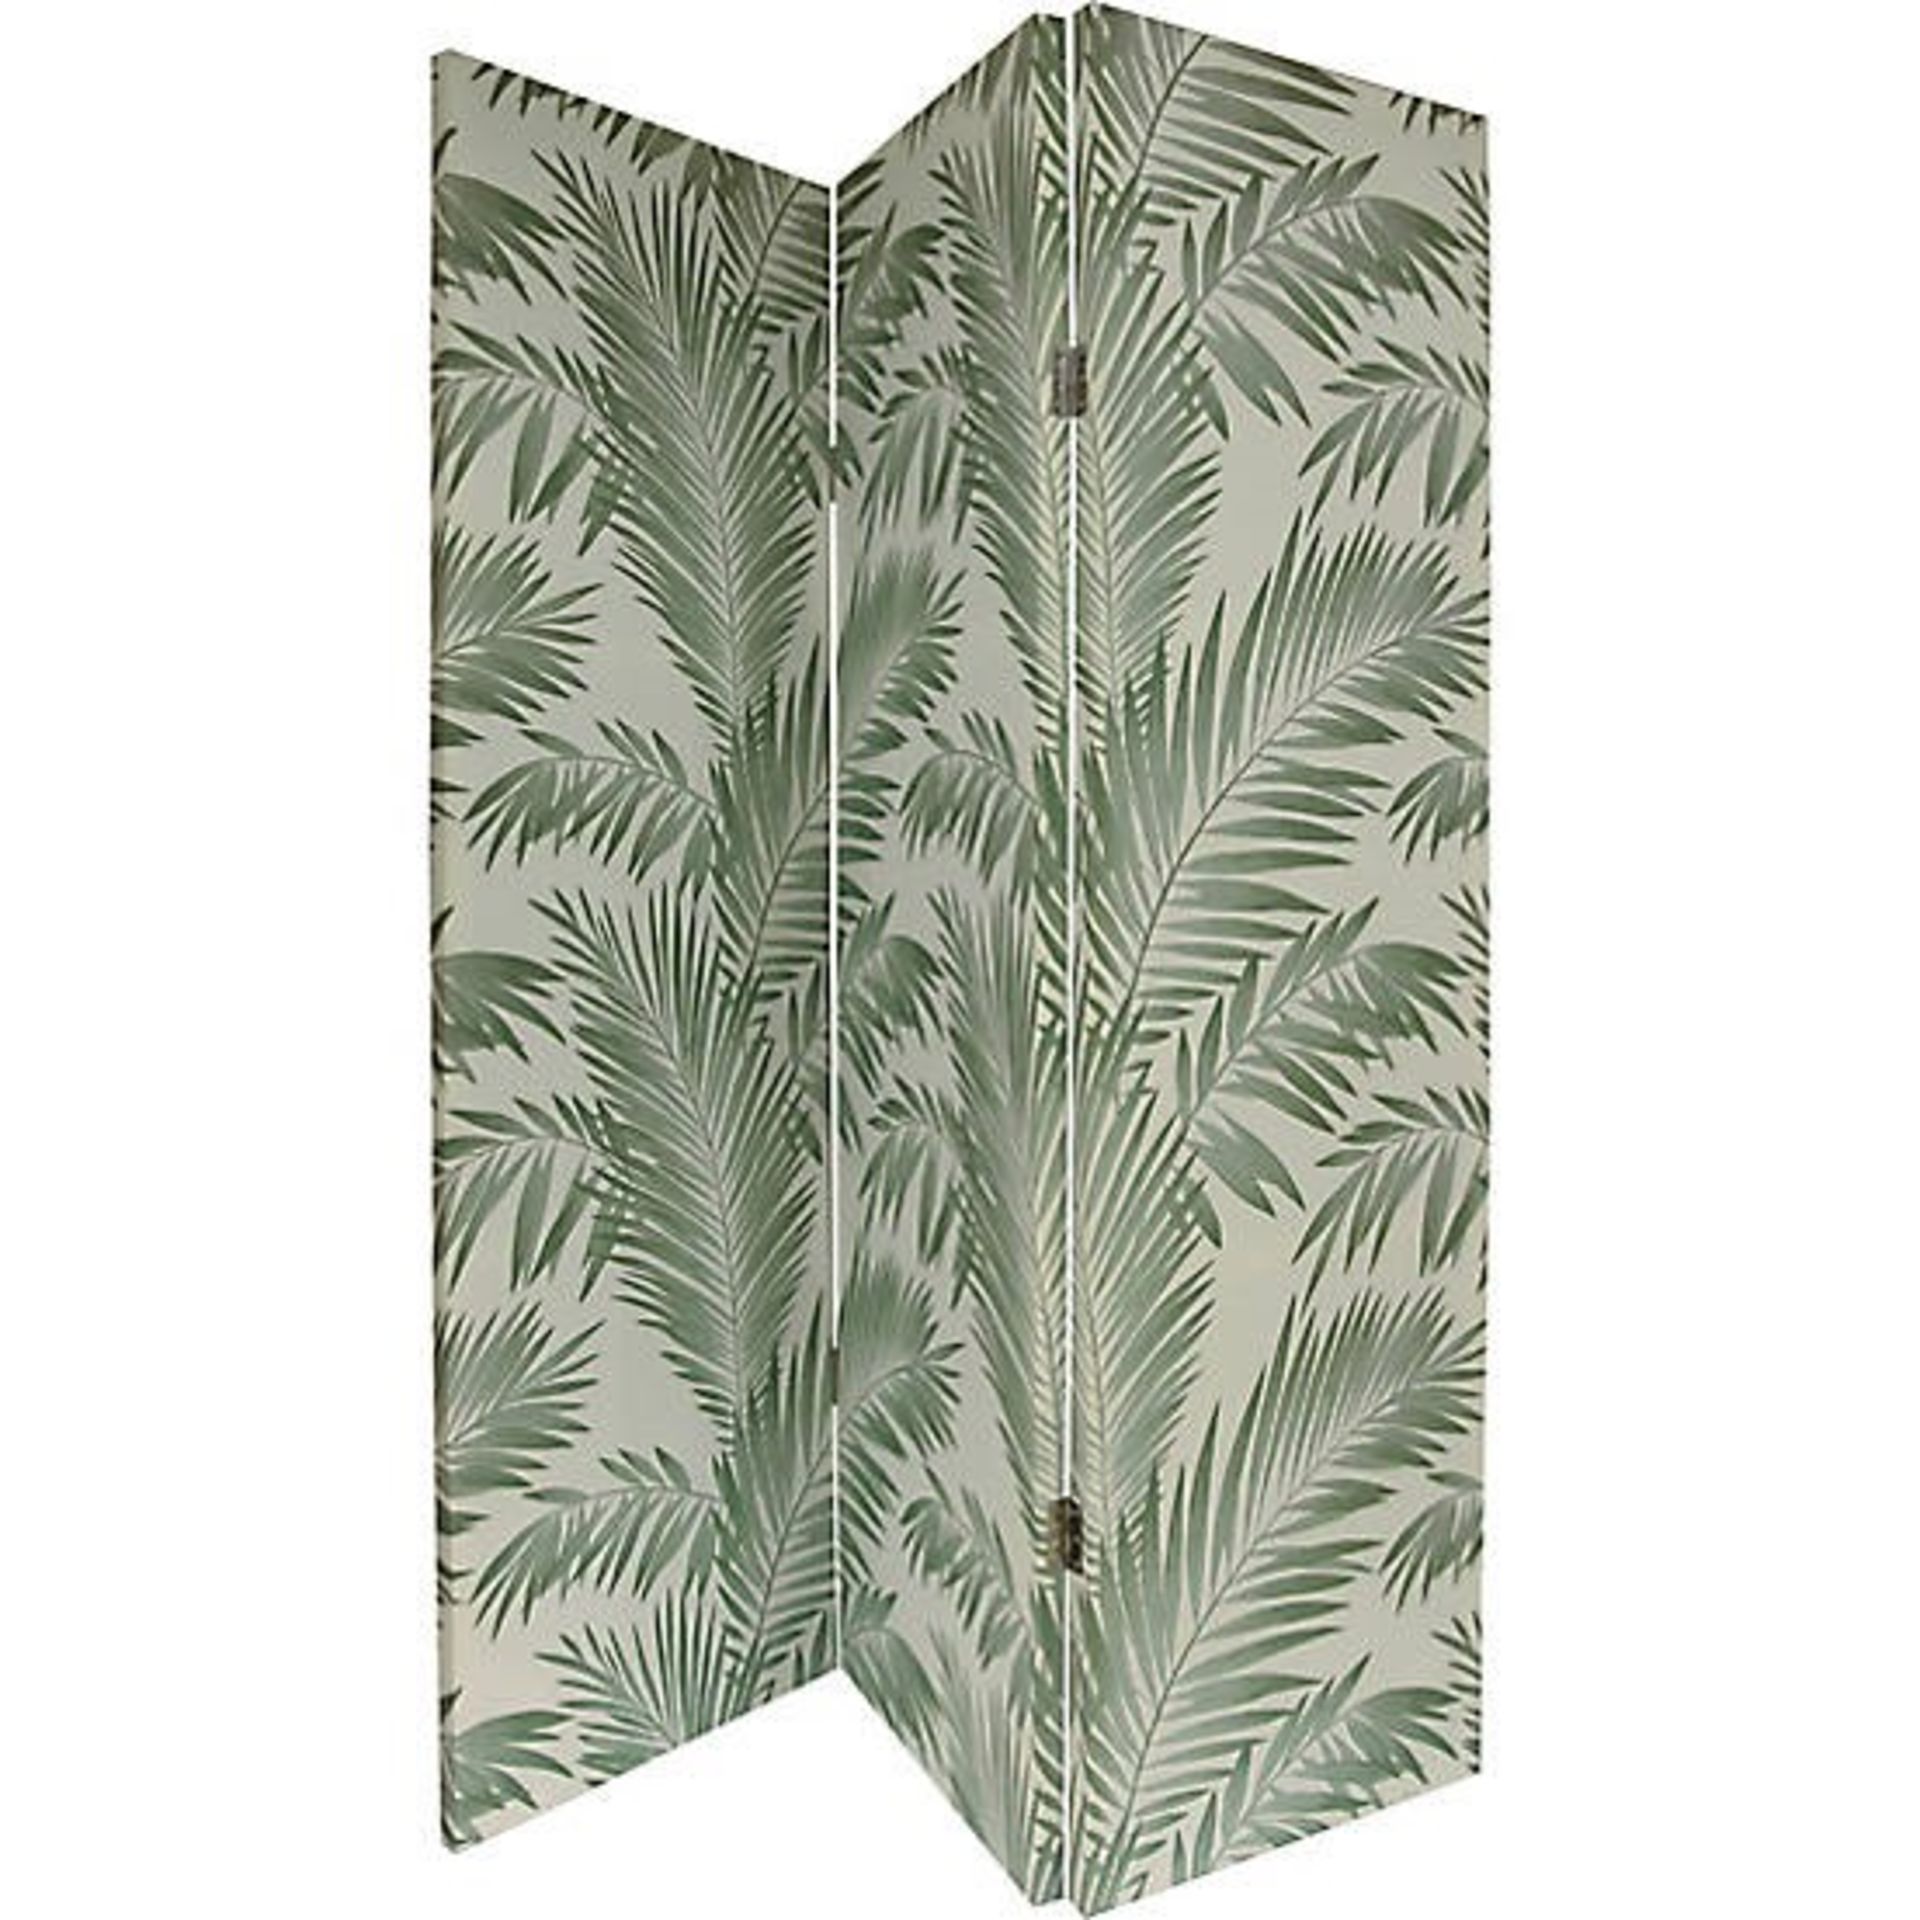 1 BRAND NEW BOXED ARTHOUSE TROPICAL PALM SCREEN ROOM DIVIDER / RRP £110.99 (VIEWING HIGHLY